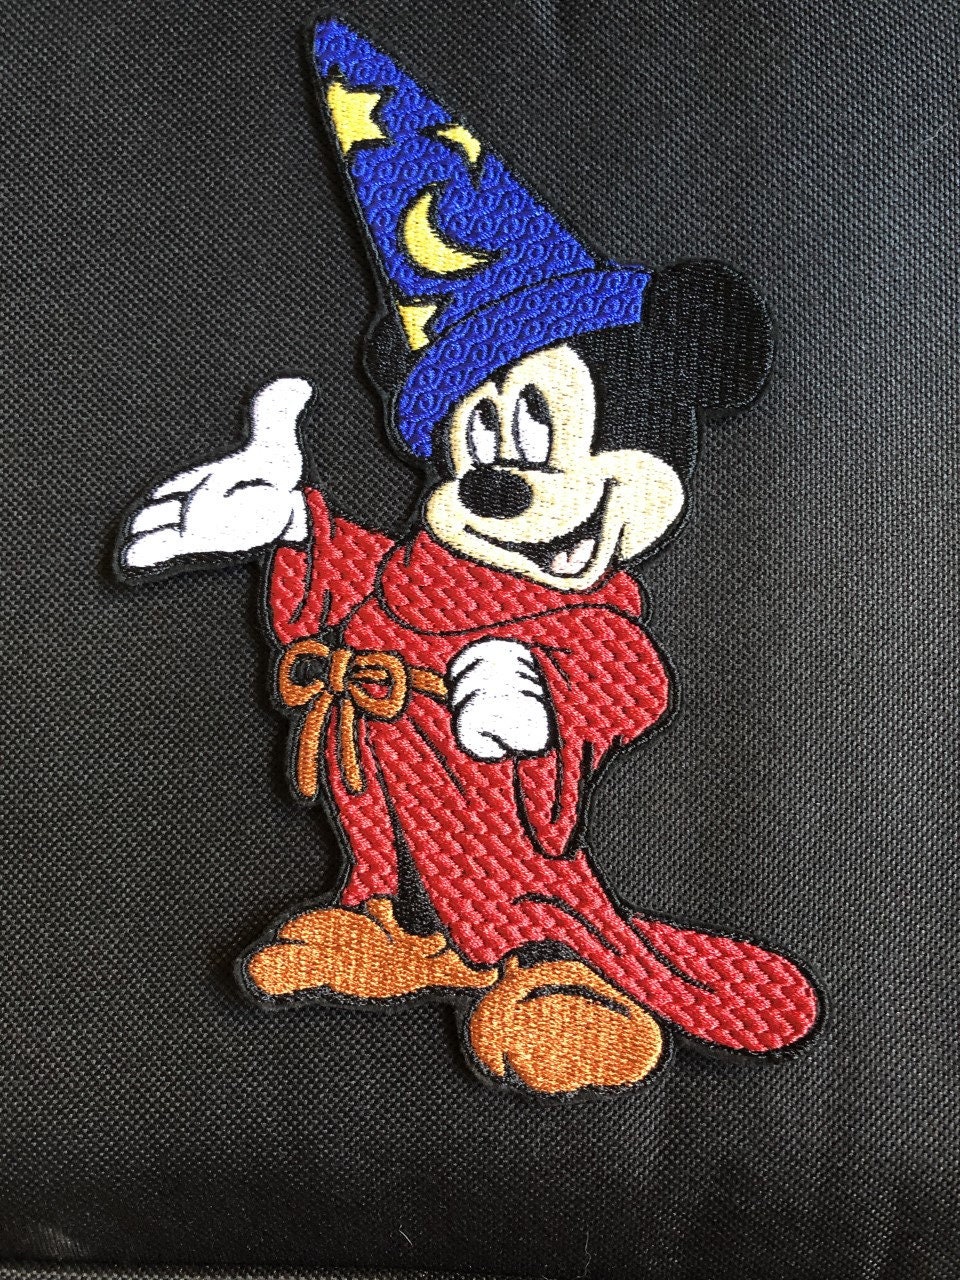 TRADING PIN BOOK BAG FOR DISNEY PINS SORCERER MICKEY MOUSE LARGE/MEDIUM